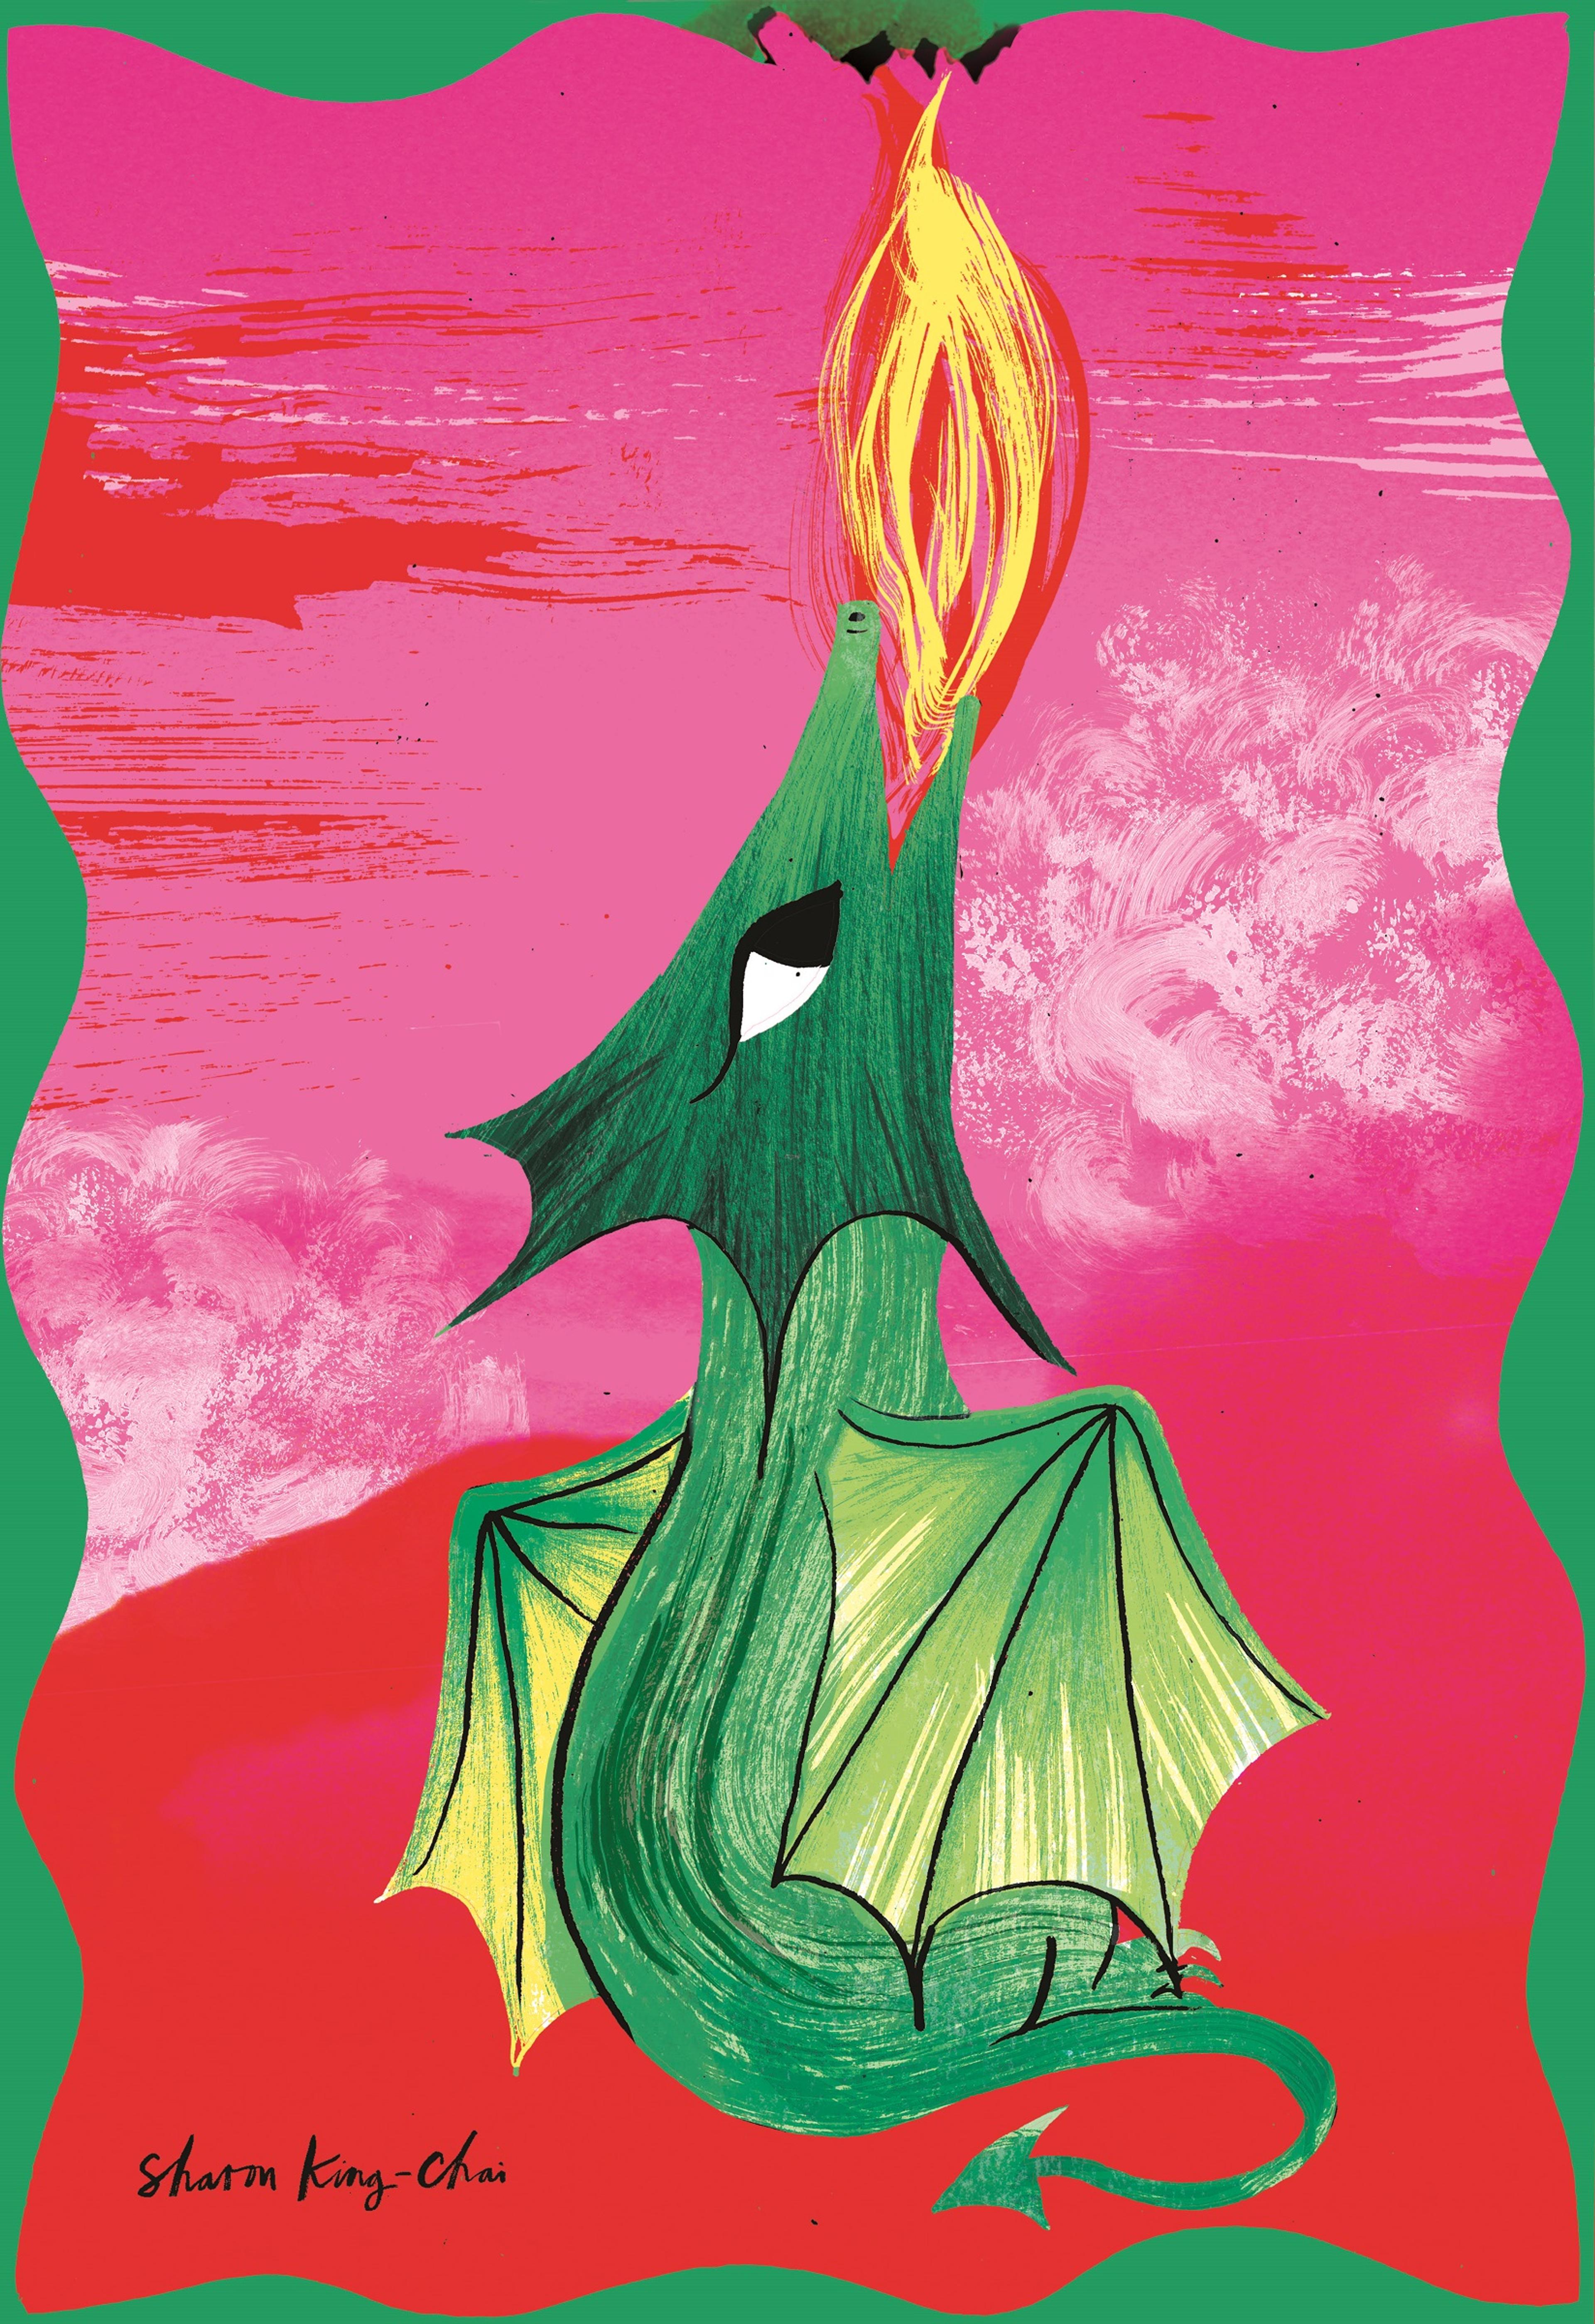 Illustration of a green dragon breathing fire against a pink background